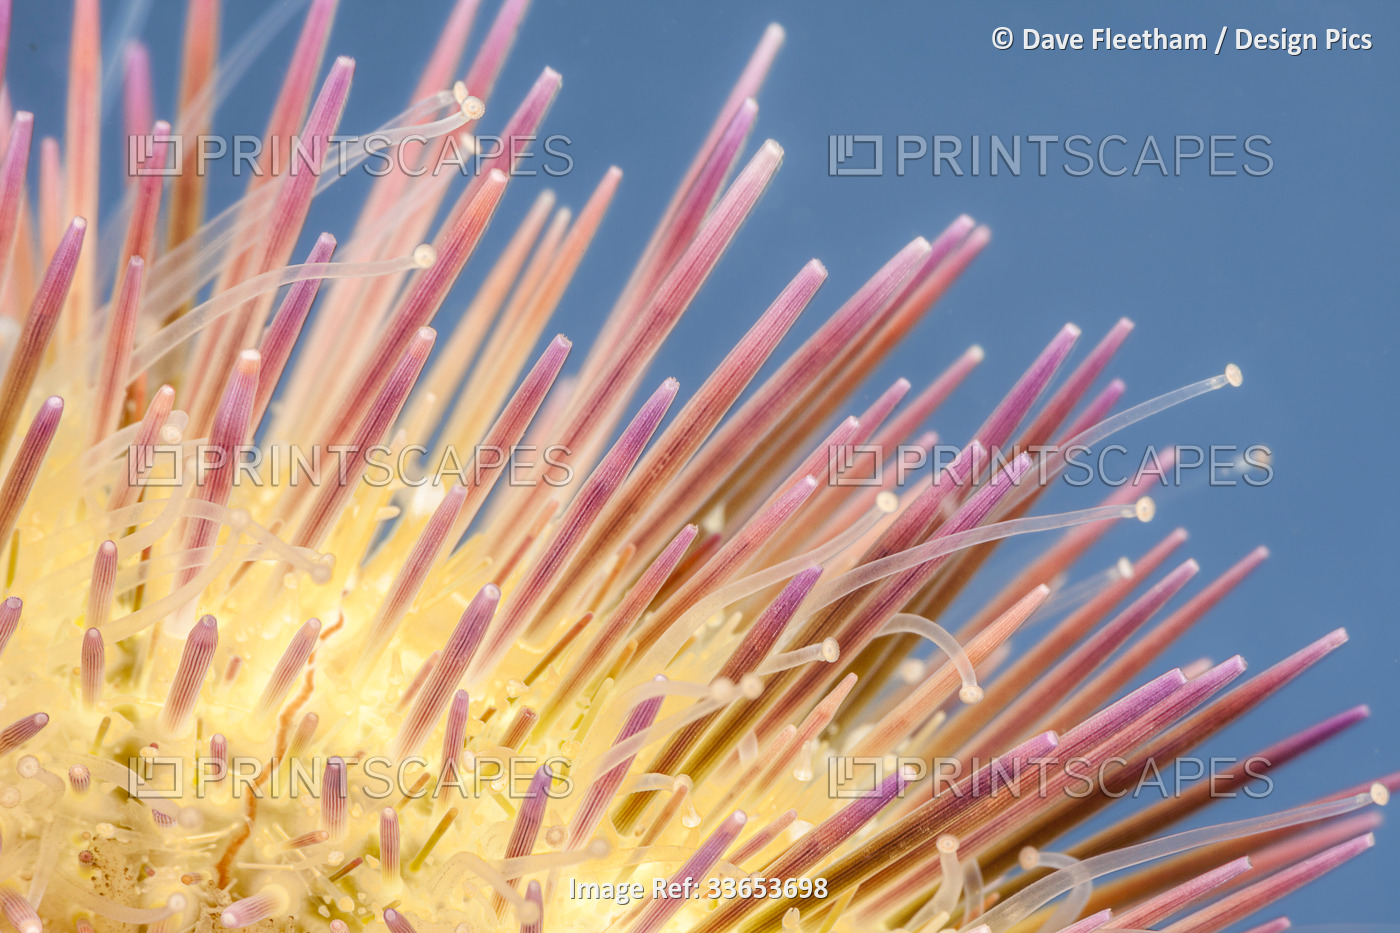 A close look at the spines and tube feet of the variegated urchin (Lytechinus ...